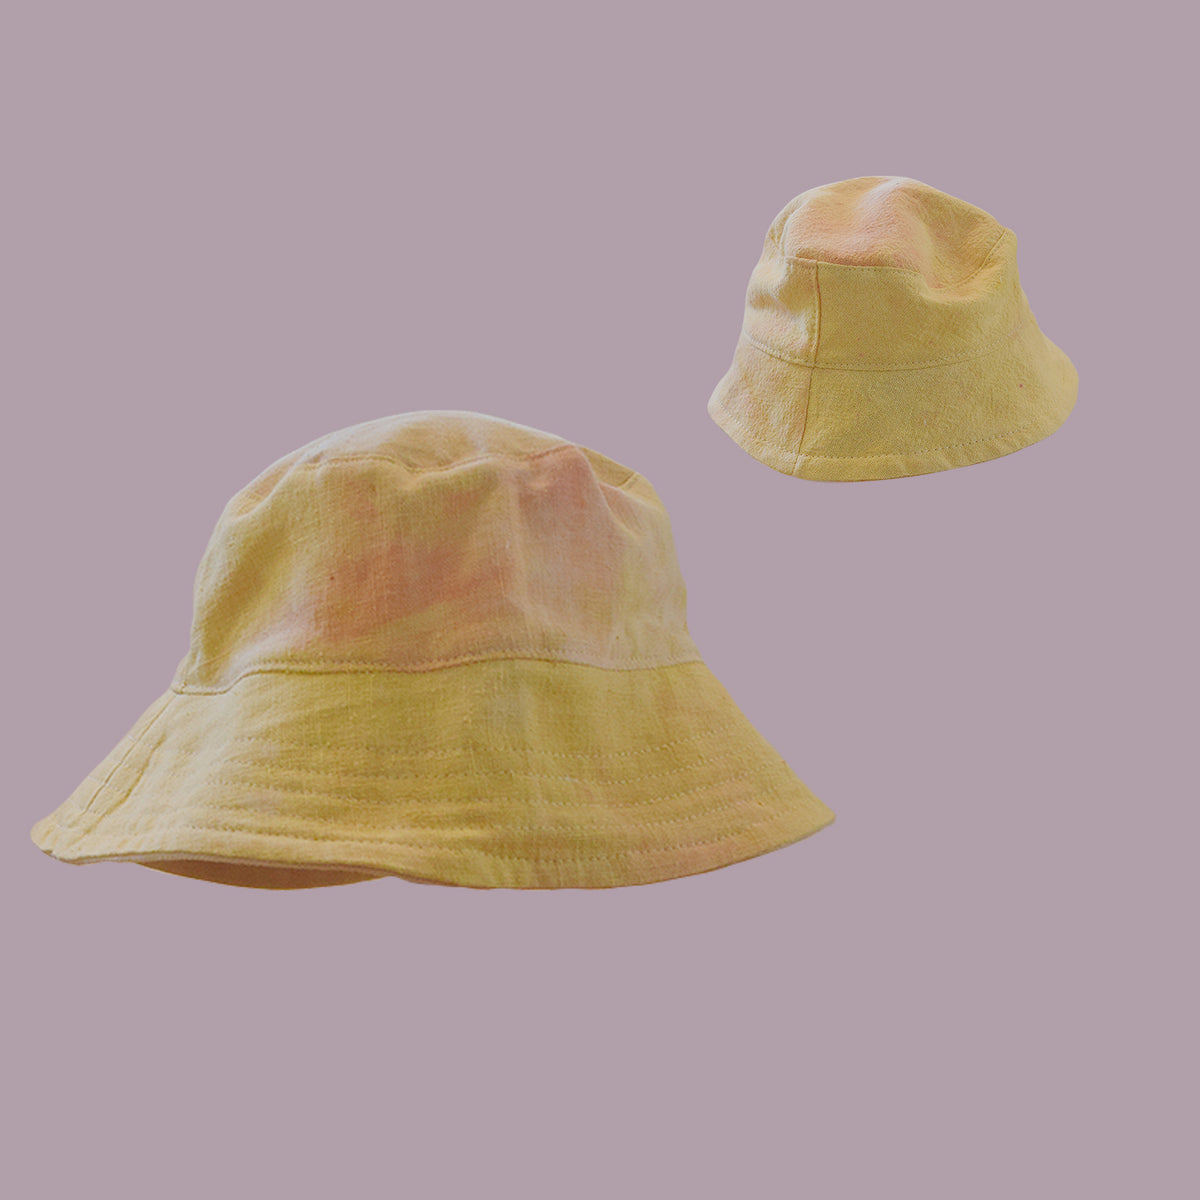 Two handsewn bucket hats floating on background